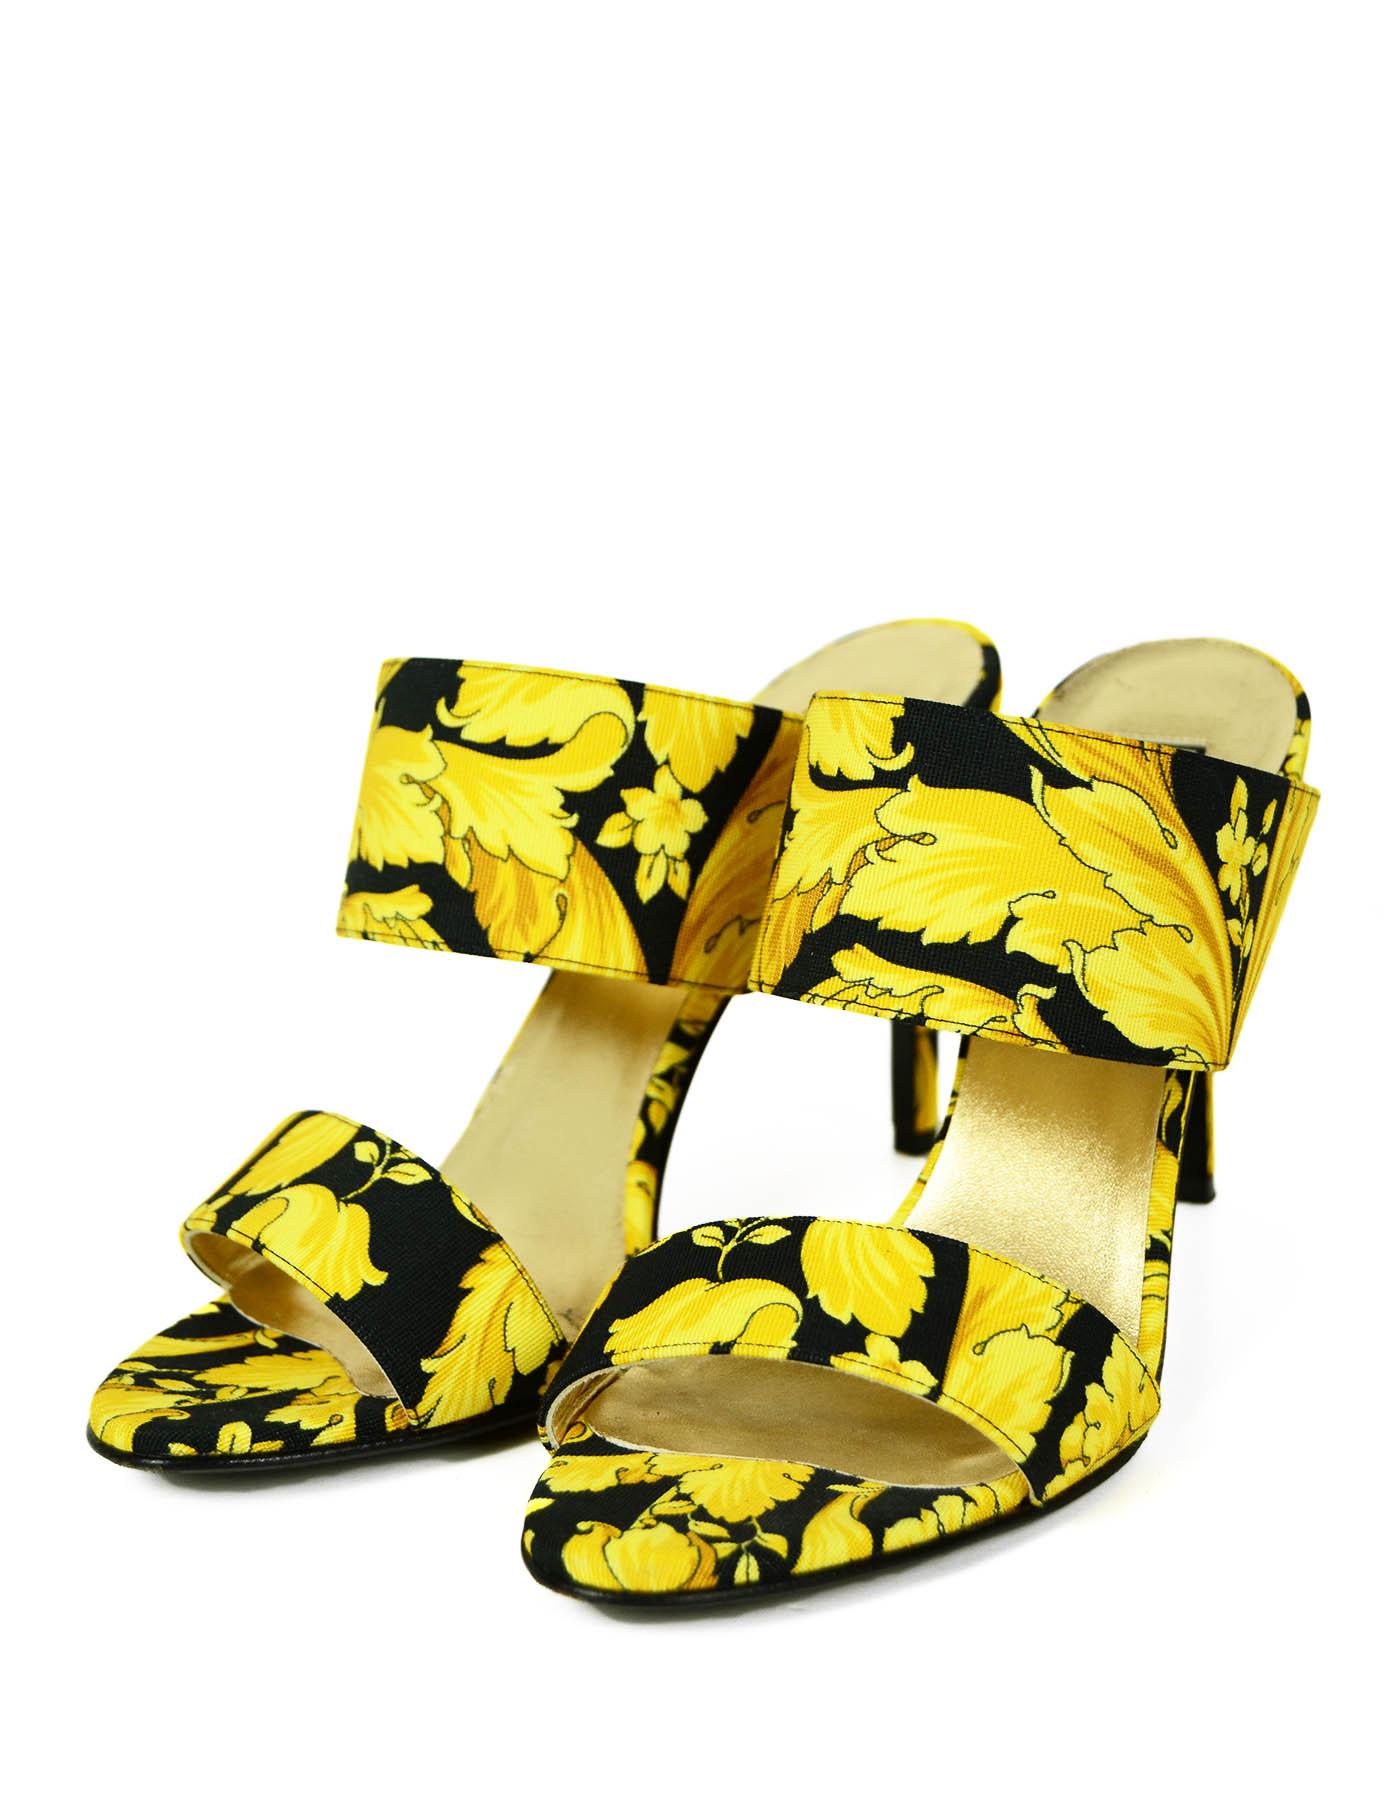 Versace Black/Gold Grosgrain Barocco Print Heeled Sandals sz 39.5

Made In: Italy
Year of Production: 2020
Color: Black and gold
Materials: Grosgrain
Closure/Opening: Slip on
Overall Condition: Excellent pre-owned condition.  Light wear to